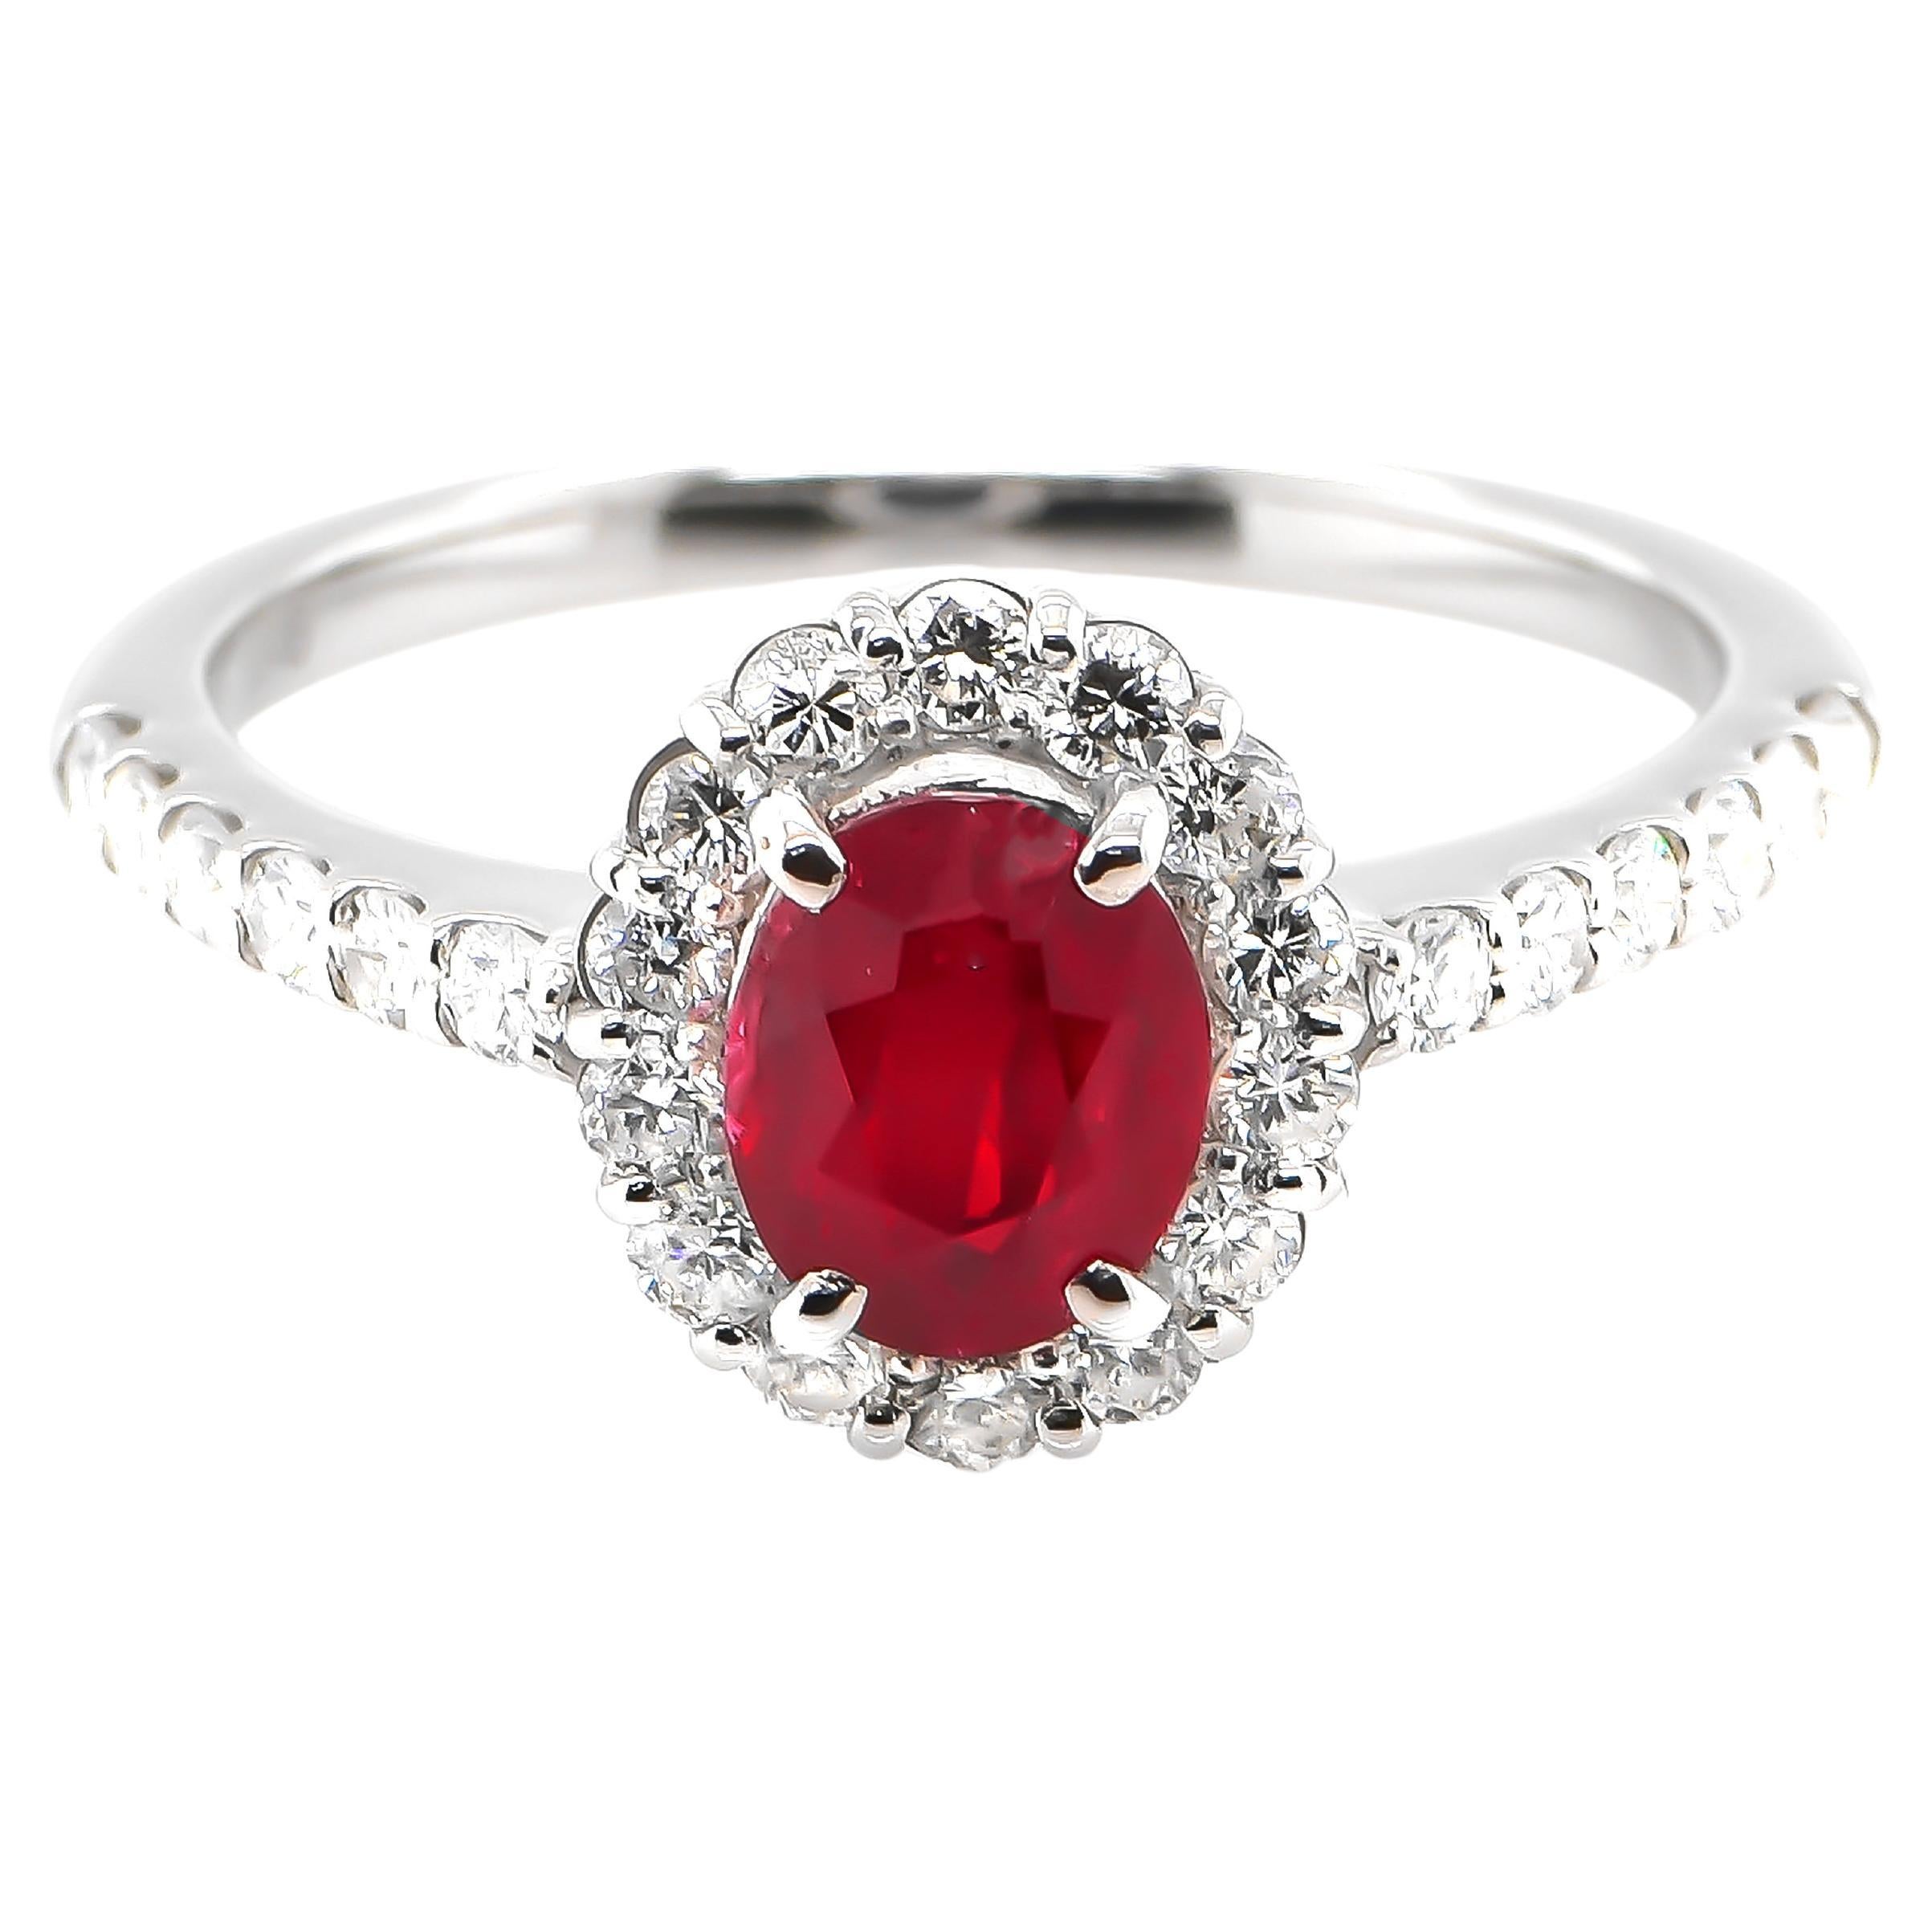 GIA Certified 1.16 Carat, No Heat, Blood Red, Burmese Ruby Ring Made in Platinum For Sale